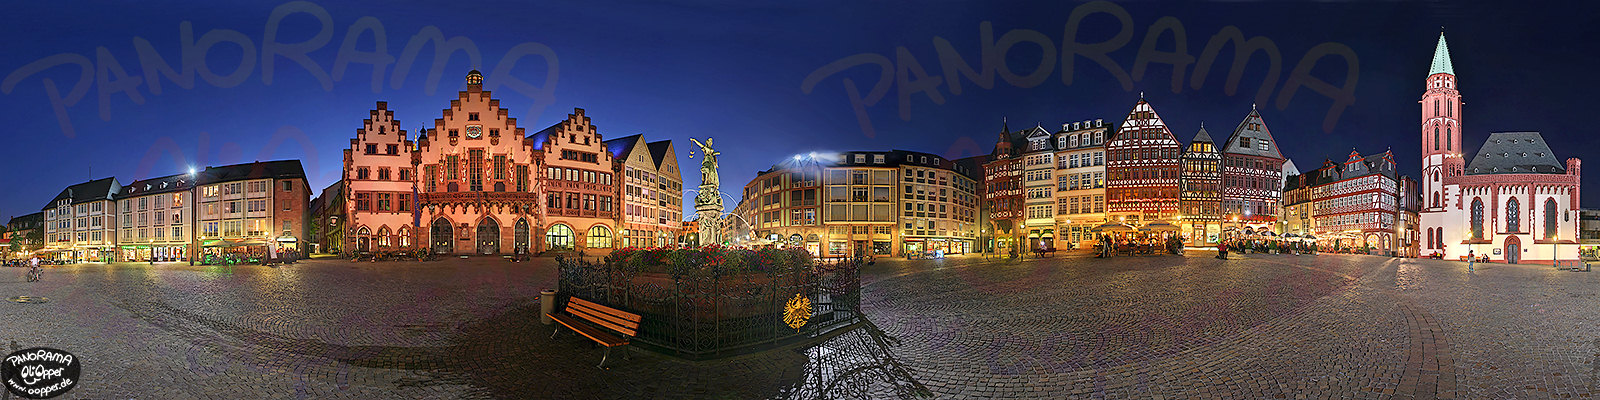 Panorama Frankfurt - R�mer - p075 - (c) by Oliver Opper